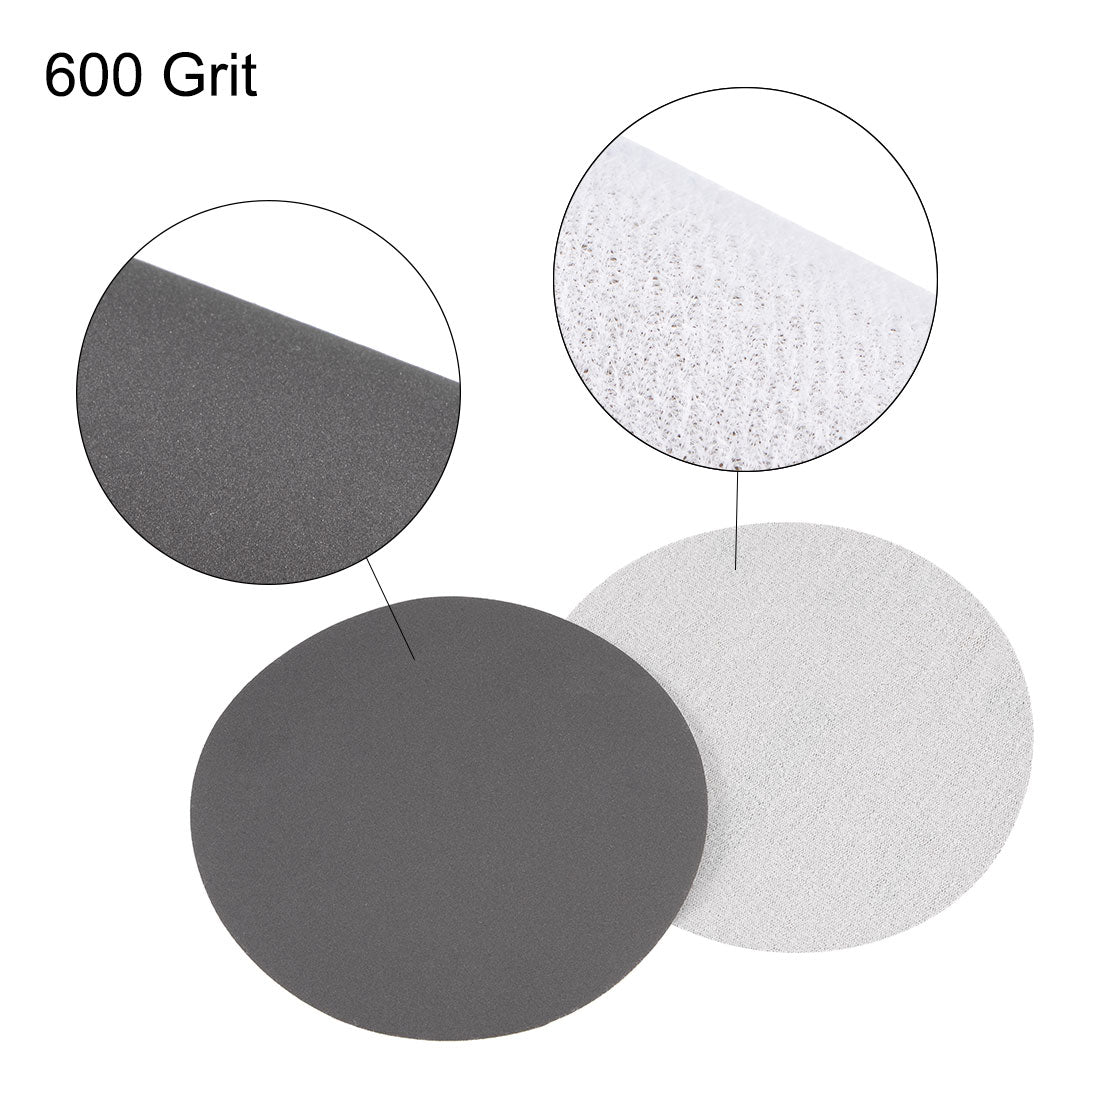 Uxcell Uxcell 5 inch Wet Dry Disc 2500 Grit Hook and Loop Sanding Disc Silicon Carbide 3pcs